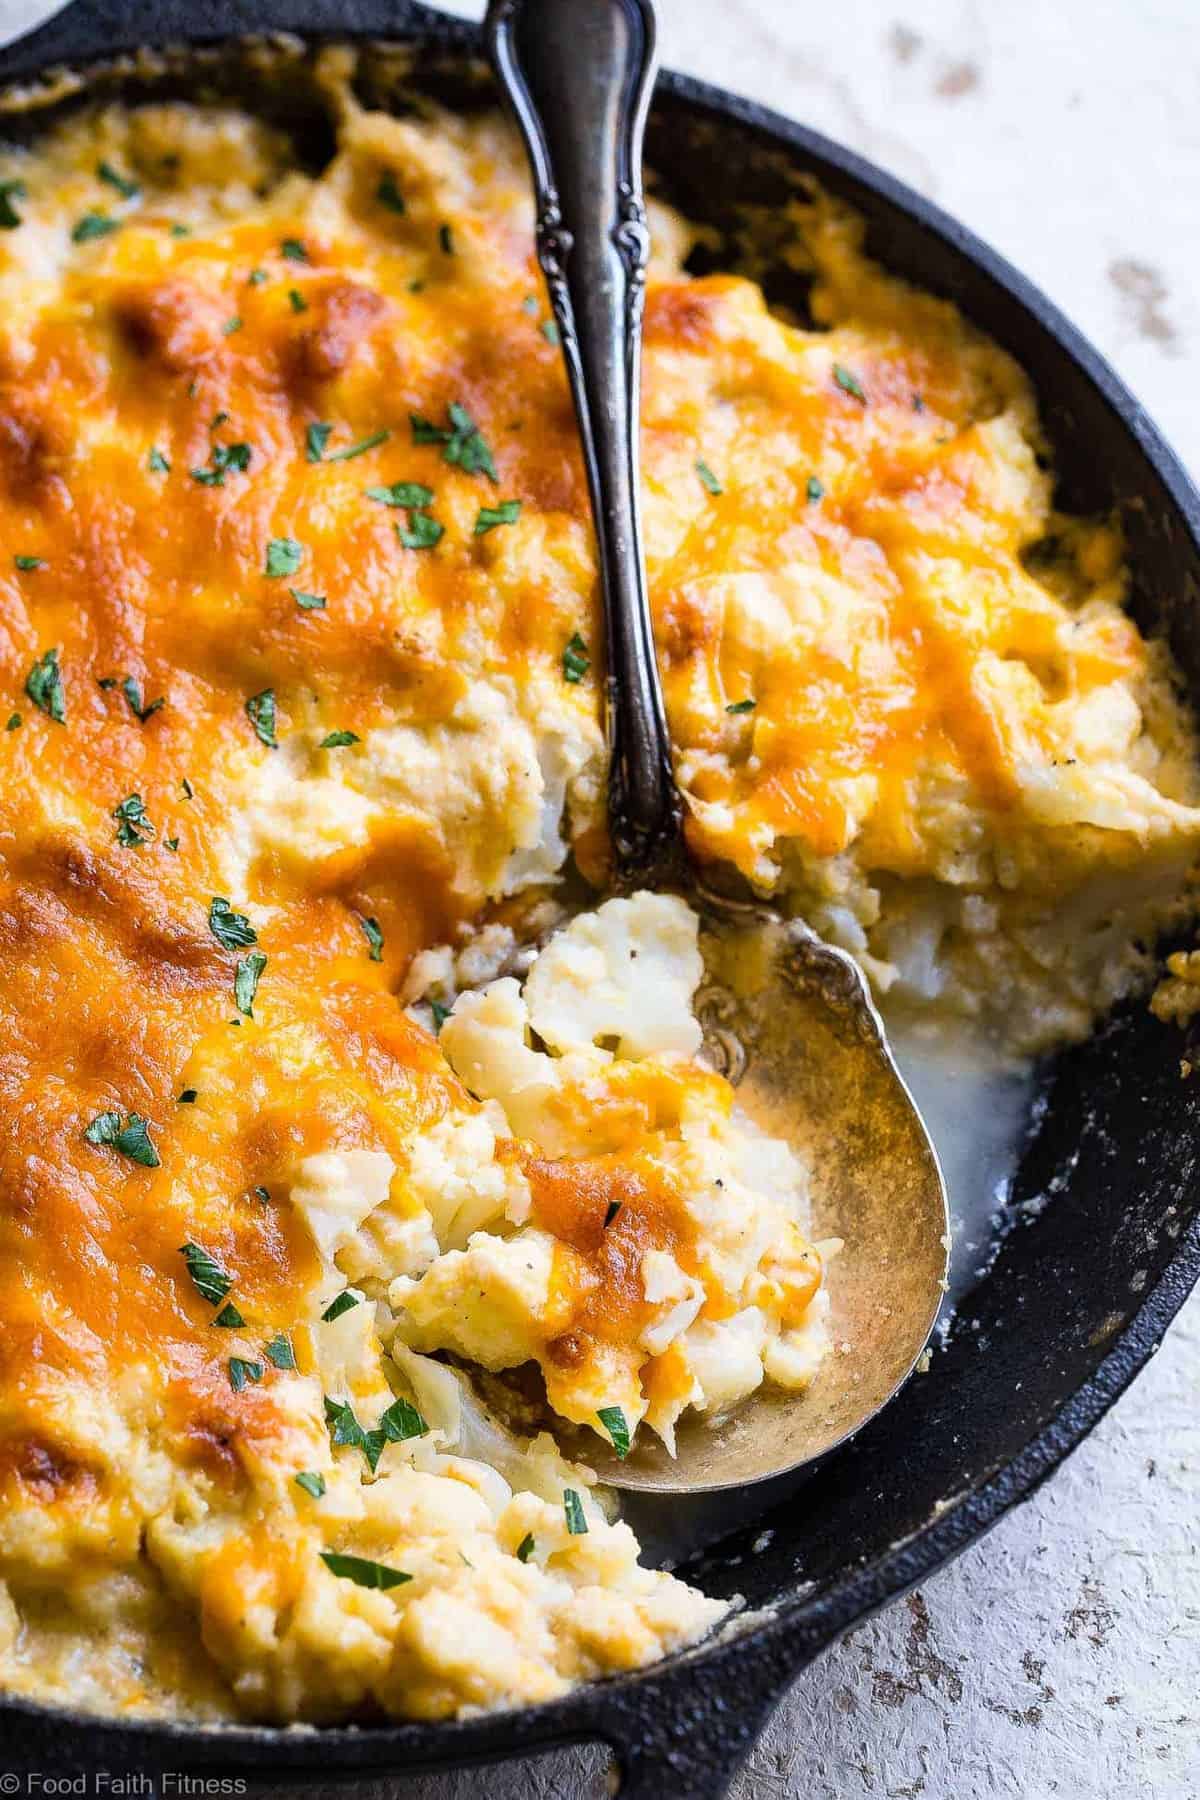 Keto Baked Cauliflower Au Gratin - This easy, healthy and keto friendly Low Carb Baked Cauliflower Au Gratin is a gluten free, delicious side dish that even the pickiest of eaters will love! Only 6 ingredients and SO cheesy! | #Foodfaithfitness | #Keto #lowcarb #Glutenfree #Healthy #Grainfree